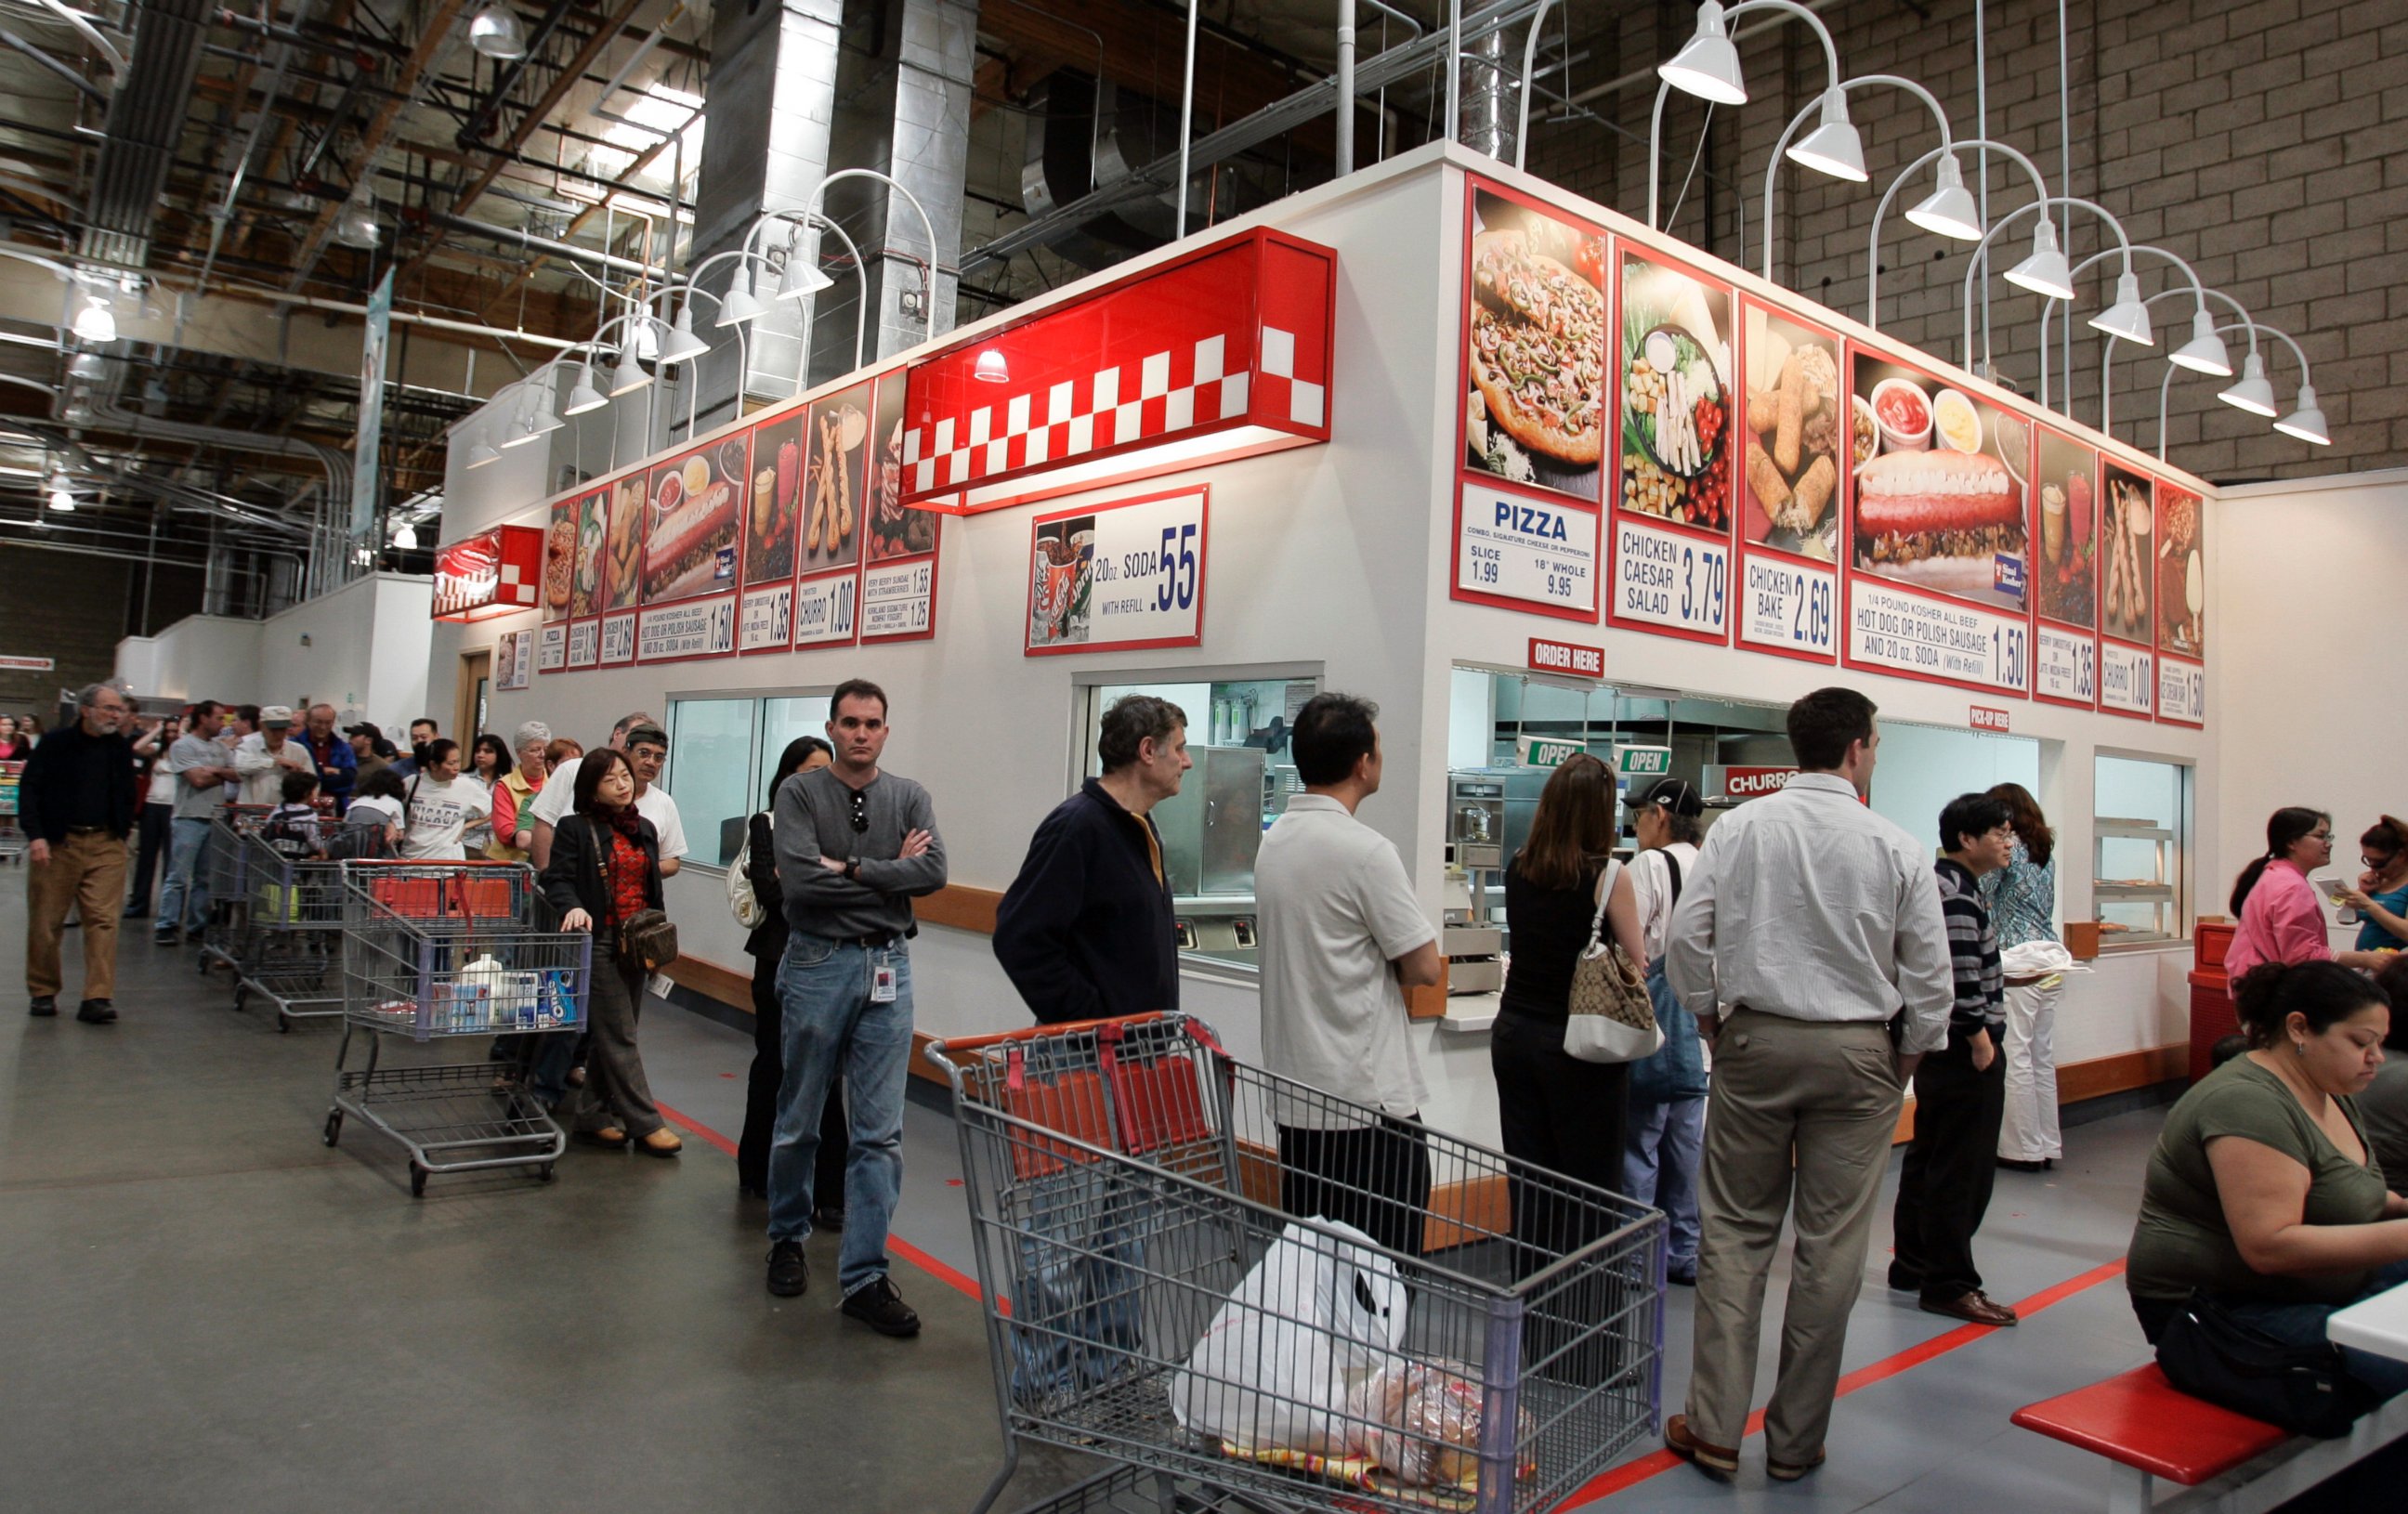 Why Costco Shoppers Are Jealous Of The Store's Canadian Food Courts